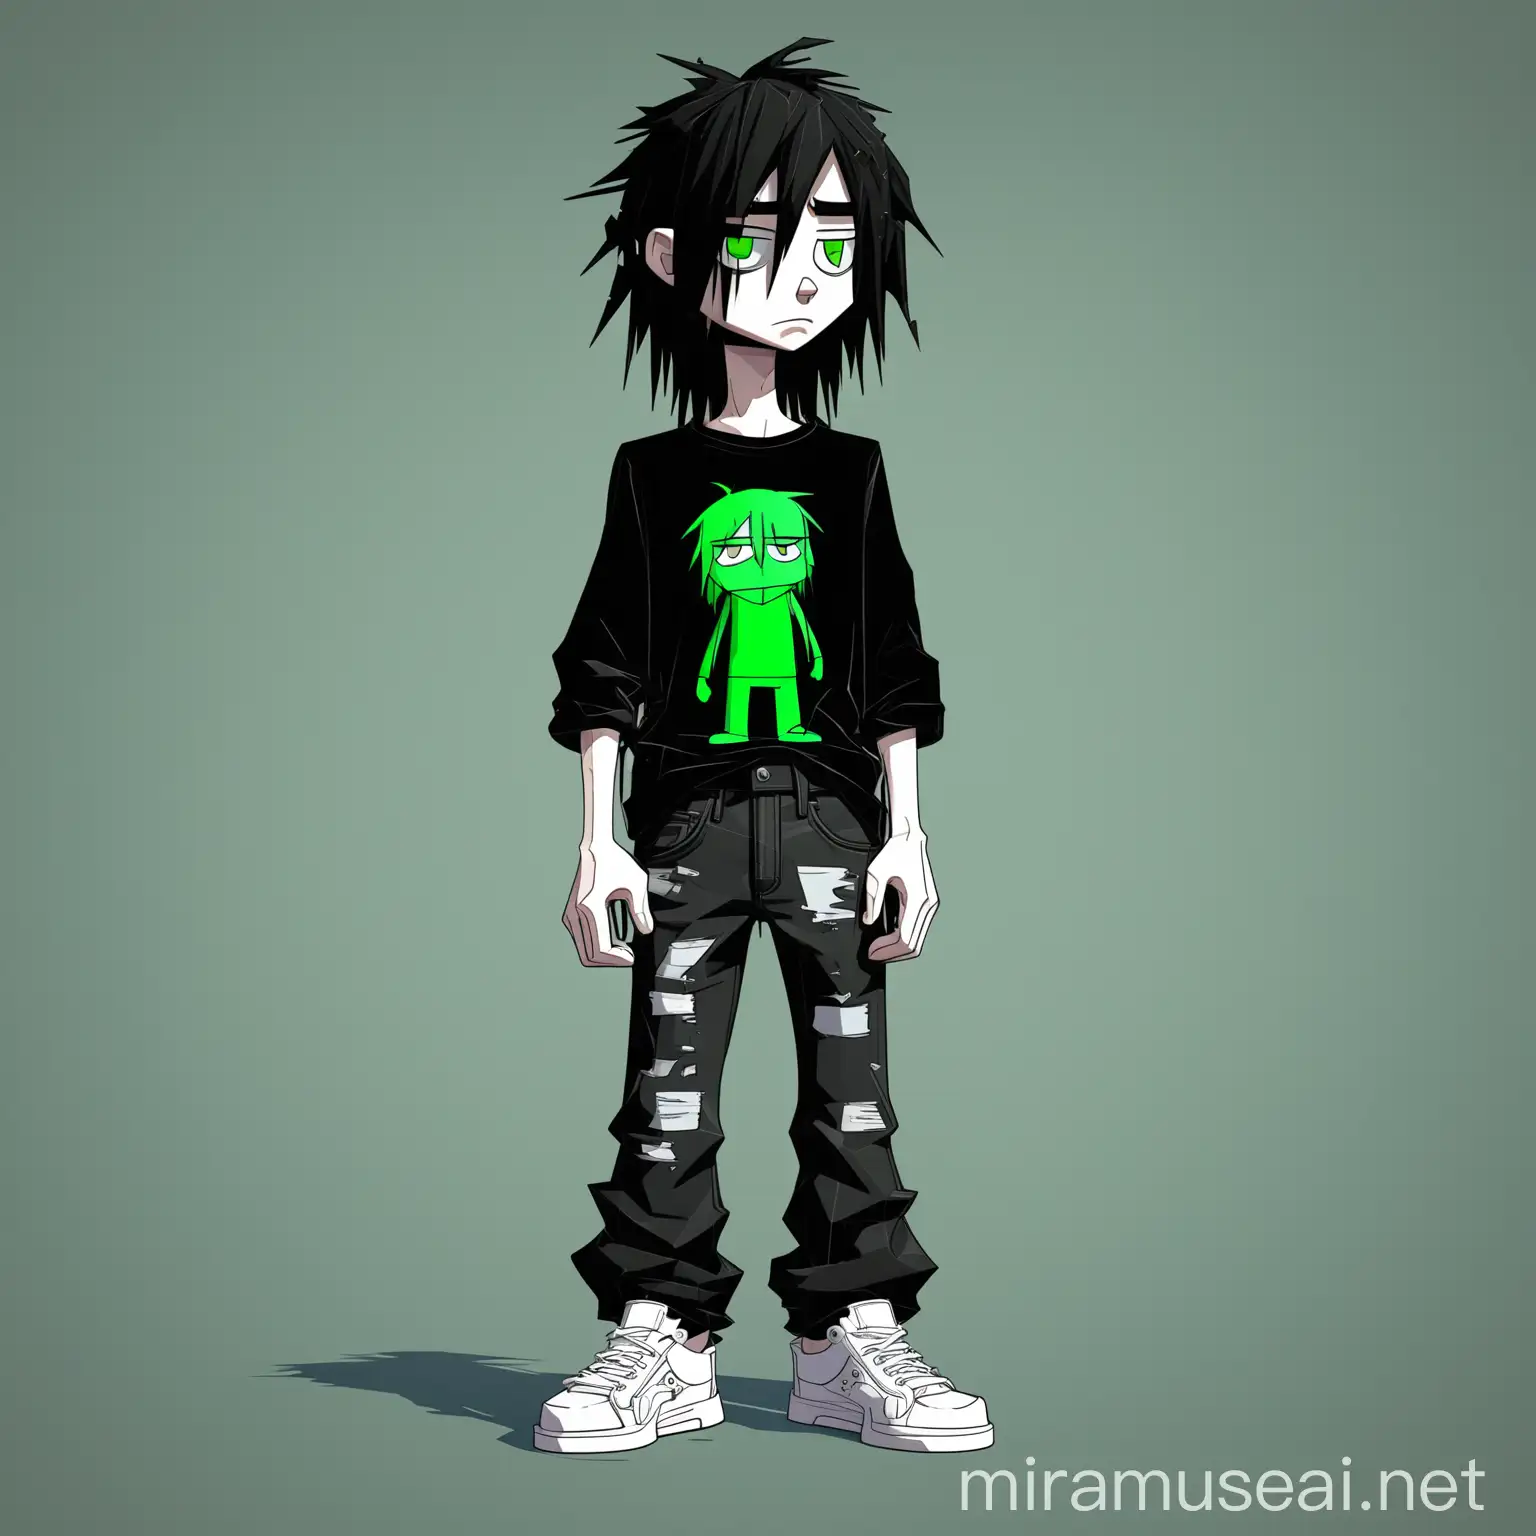 The cartoon depicts an emo boy, standing sideways and full-length, in black baggy jeans and white low-top sneakers. He has long dark hair, disheveled and unkempt, green eyes.do this in the form of a cartoon small polygonal 3D character in full height (the head is smoother and larger).